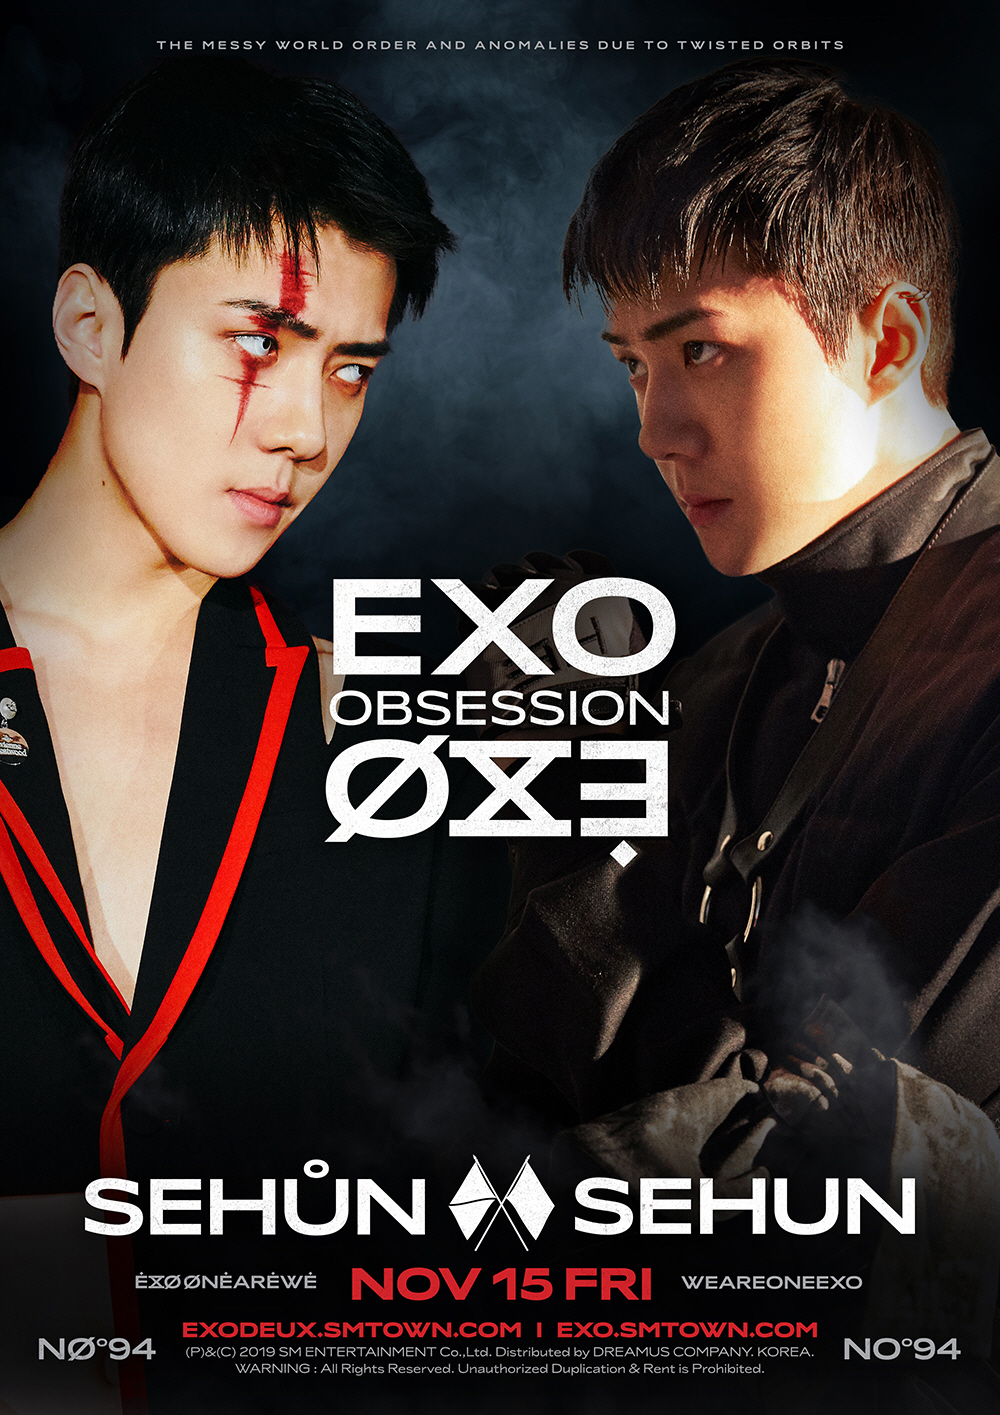 Regular 6th album OBSESSION (Option) by EXO (a member of SM Entertainment) is amplifying expectations with the participation of global musicians.EXO Regular 6th album OBSESSION, released on the 27th, will include the title song Obsession of the addictive hip hop dance genre, Trouble (Trouble), Jekyll, Dance (Groove), Ya Ya (Yaya Ya), Baby You Are (Baby Yua), Non Stop (Non Stop), Today After Day and Butterfly Effect are included in total, which is expected to attract global fans with EXOs unique musical color.In particular, this album includes the famous Hip hop producer Dem Jointz (Dem Jointz), the British production team LDN Noise (London Noise), the talented composition team 153/Joombas Music Group (153/Zumbas Music Group), SEGA Hitmaker Yoo Young-jin, Kenzie (Kenzie), DEEZ (Diz), JINBYJ Various domestic and foreign participating groups, including IN (Jin Baijin), worked to further enhance the perfection.Also, the teaser image released through various SNS accounts of EXO and X-EXO at 0:00 today (15th) is getting a hot response with the image of X-EXO Sehun, which shows the force that can not be encountered with EXO Sehun, which has a restrained charm that stands out with splendor.On the other hand, EXO Regular 6th album OBSESSION will be released on November 27th at 6 pm on various music sites such as Melon, Flo, Genie, iTunes, Apple Music, Sporty Pie, QQ Music, Cougu Music and Couer Music.